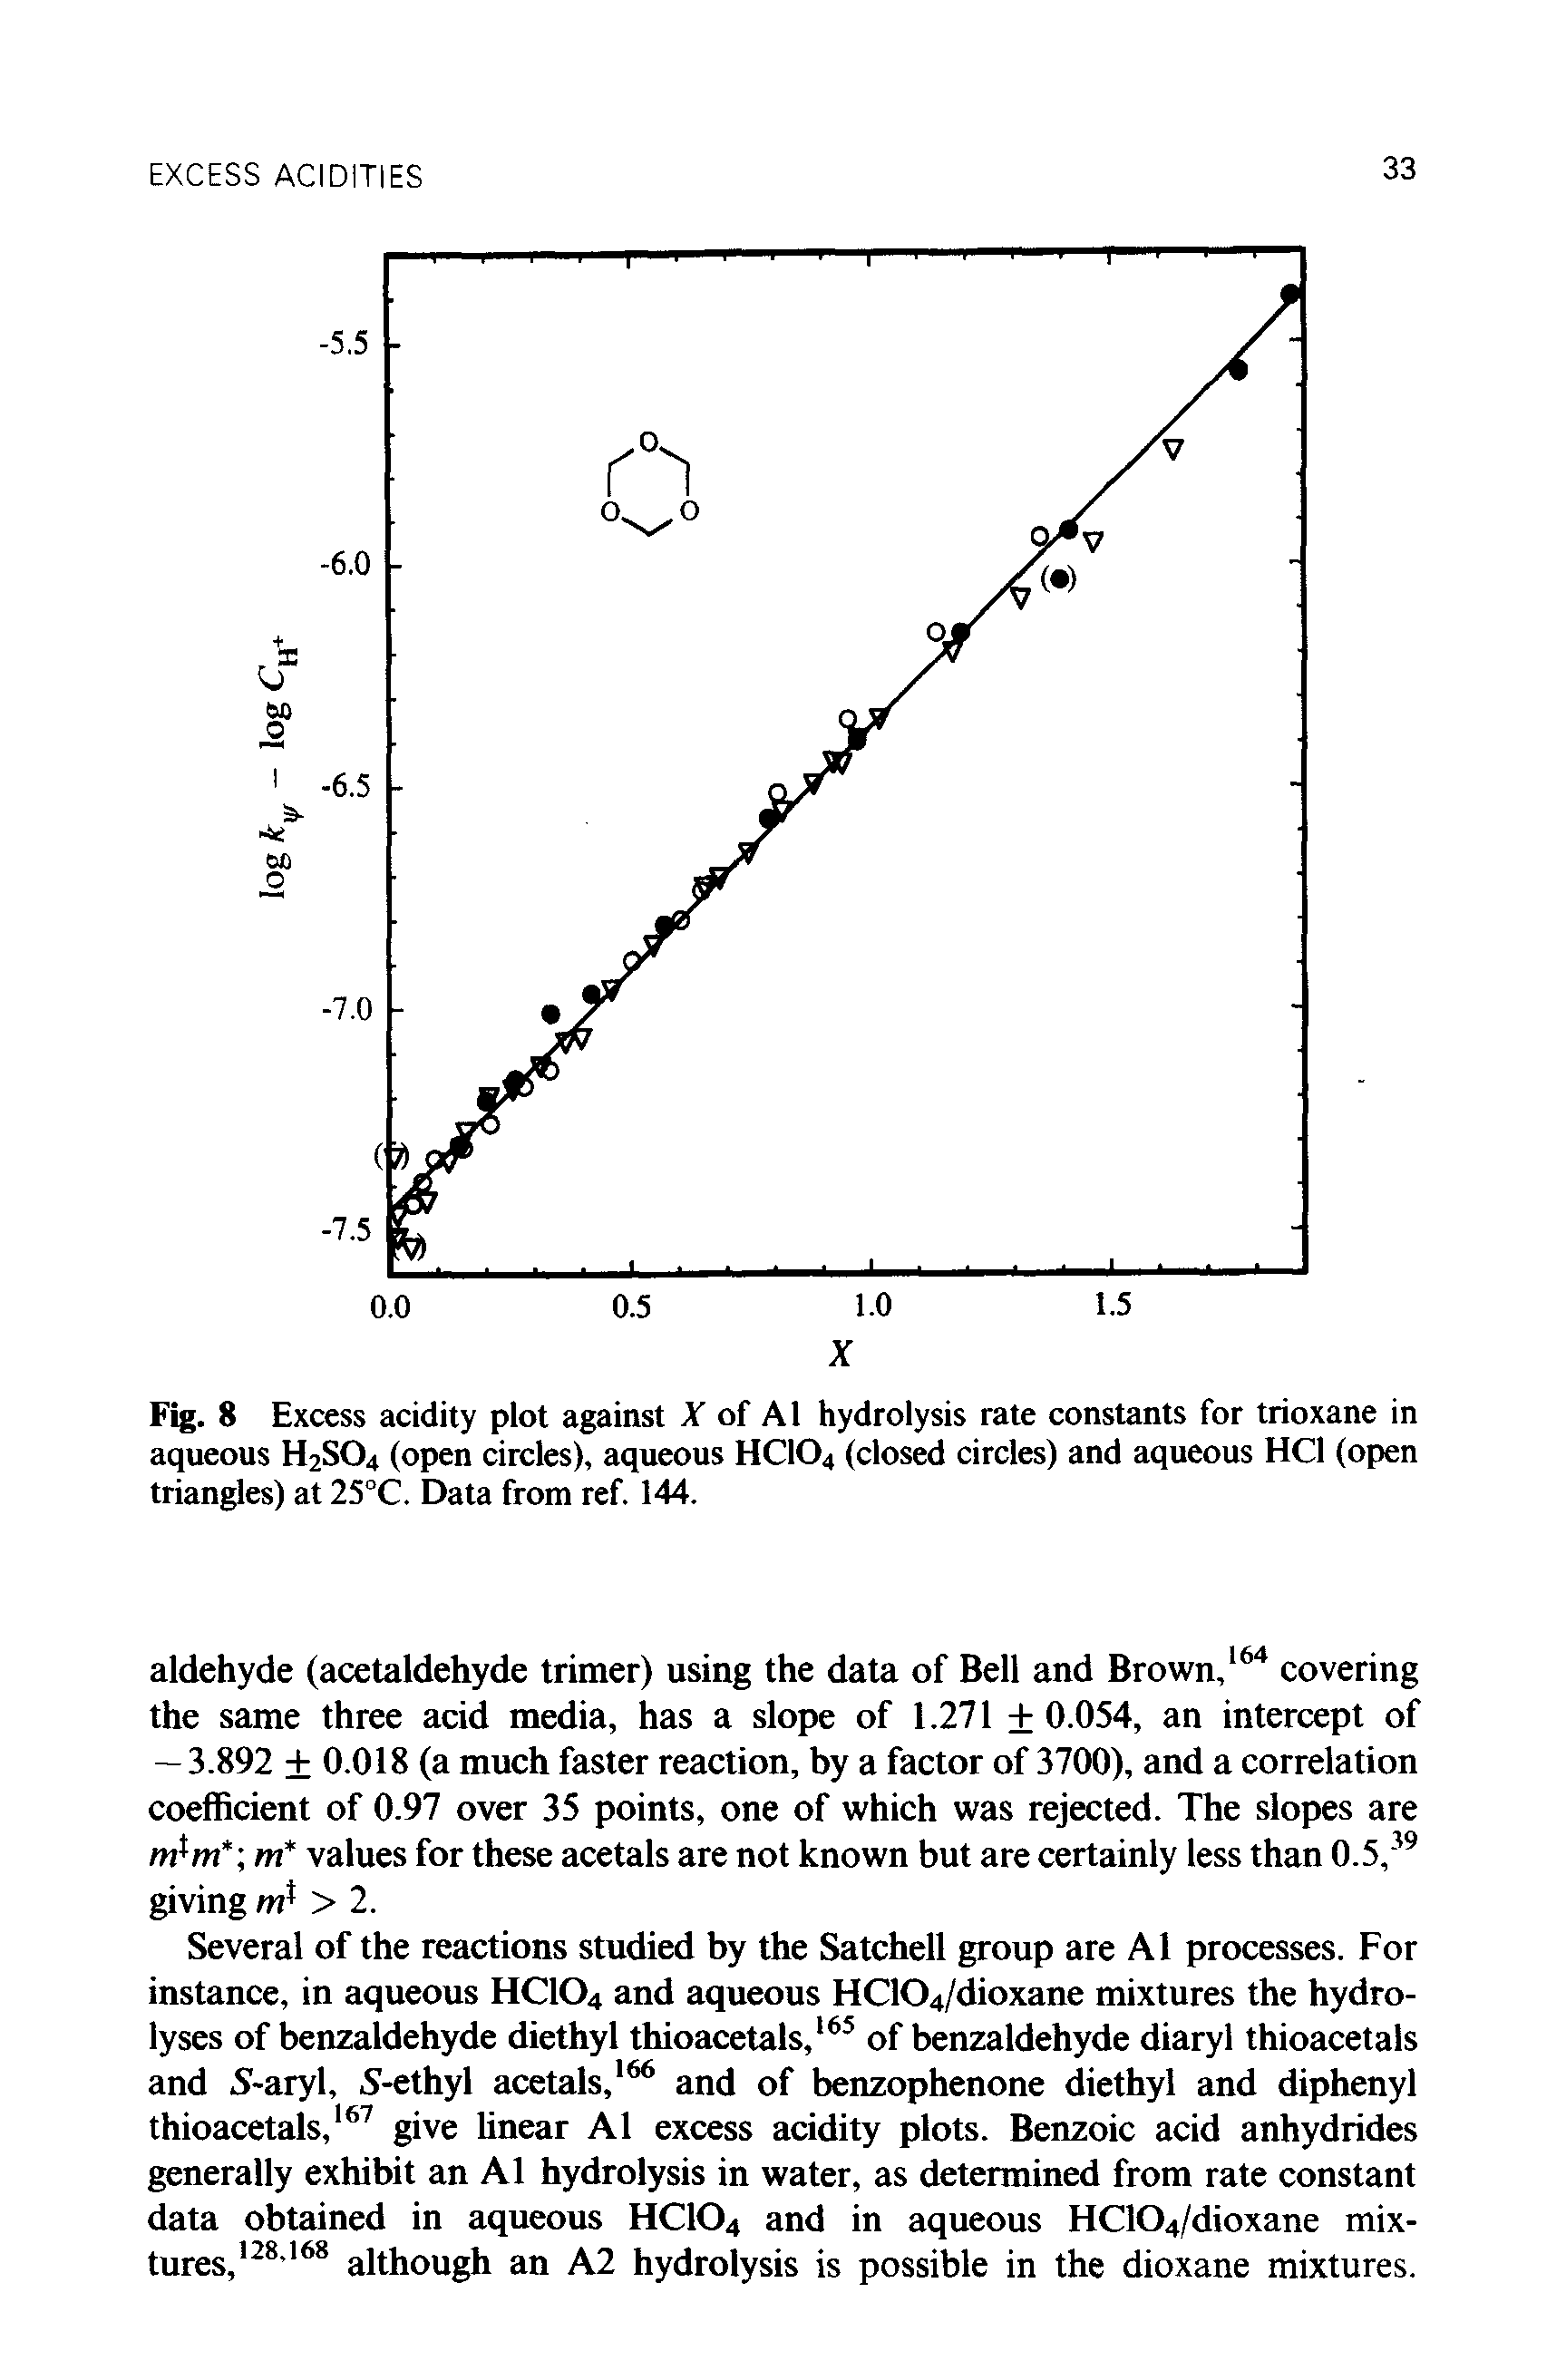 Fig. 8 Excess acidity plot against X of A1 hydrolysis rate constants for trioxane in aqueous H2S04 (open circles), aqueous HC104 (closed circles) and aqueous HC1 (open triangles) at 25°C. Data from ref. 144.